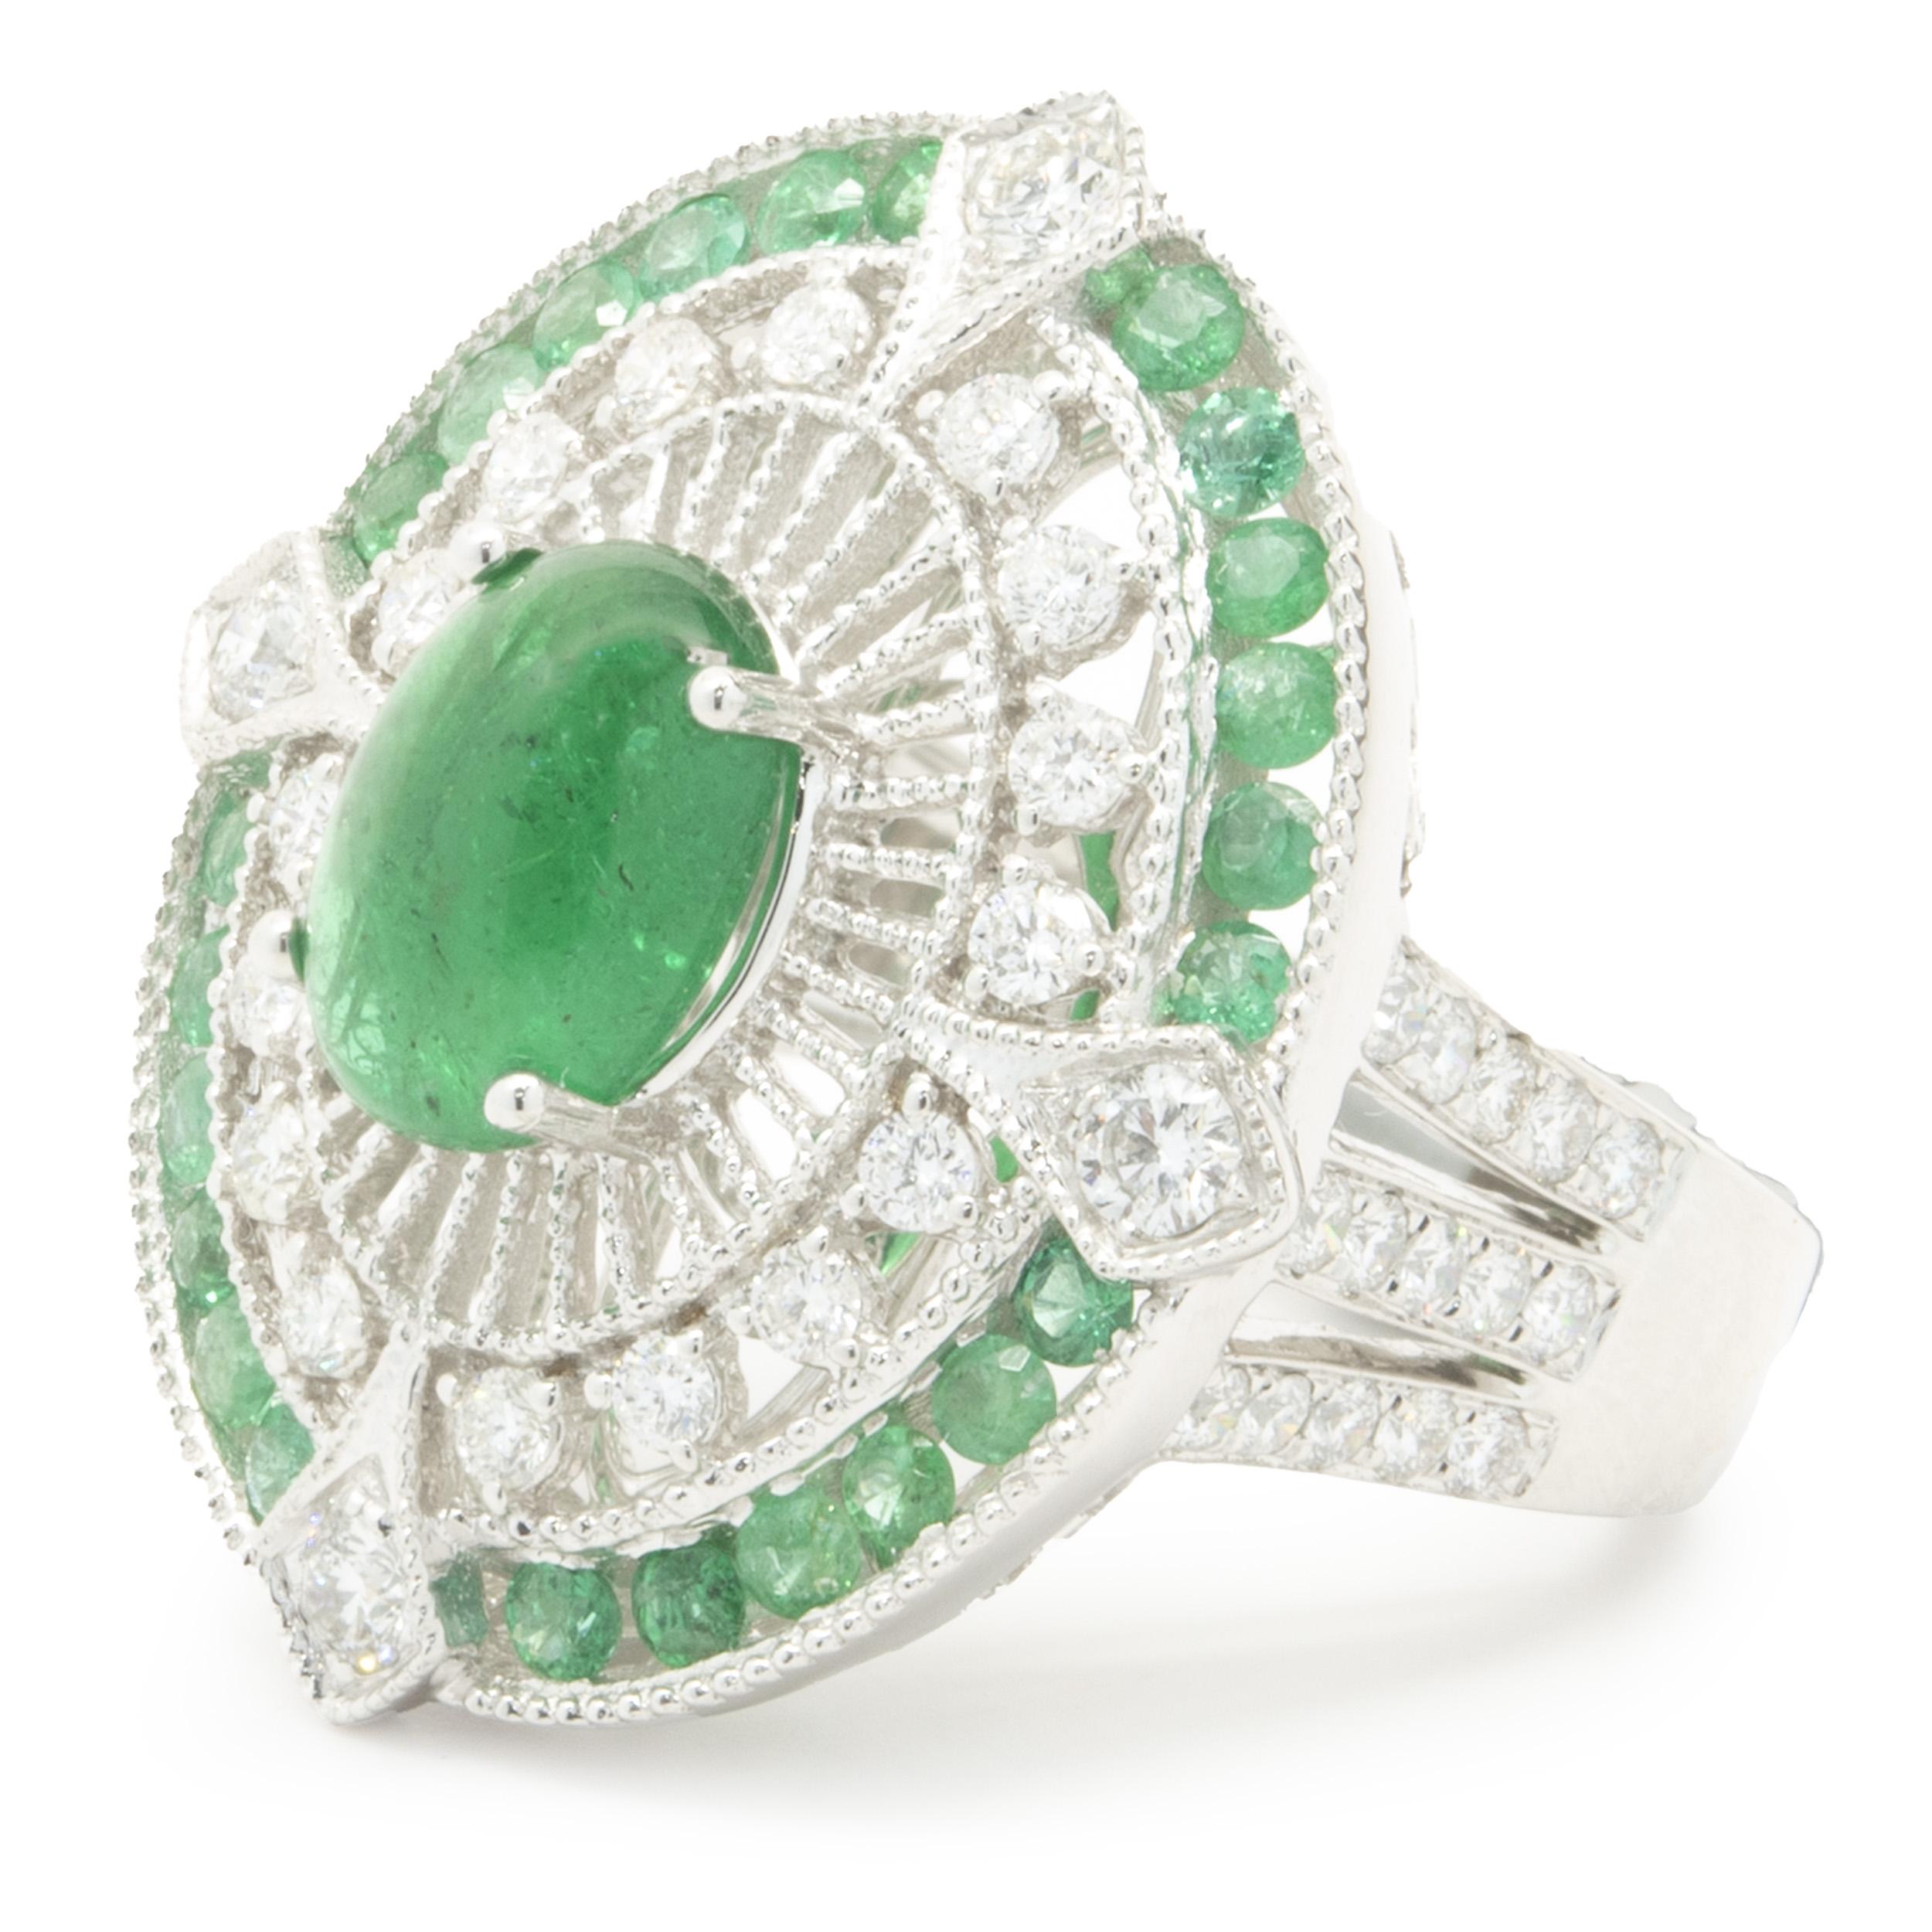 Designer: custom
Material: 18K white gold
Emerald: 1 cabochon cut = 3.00ct
Emerald: 24 round cut = 3.70cttw
Diamond: 50 round brilliant cut = 1.34cttw
Color: G
Clarity: VS2
Ring Size: 6.5 (complimentary sizing available)
Weight: 14.15 grams